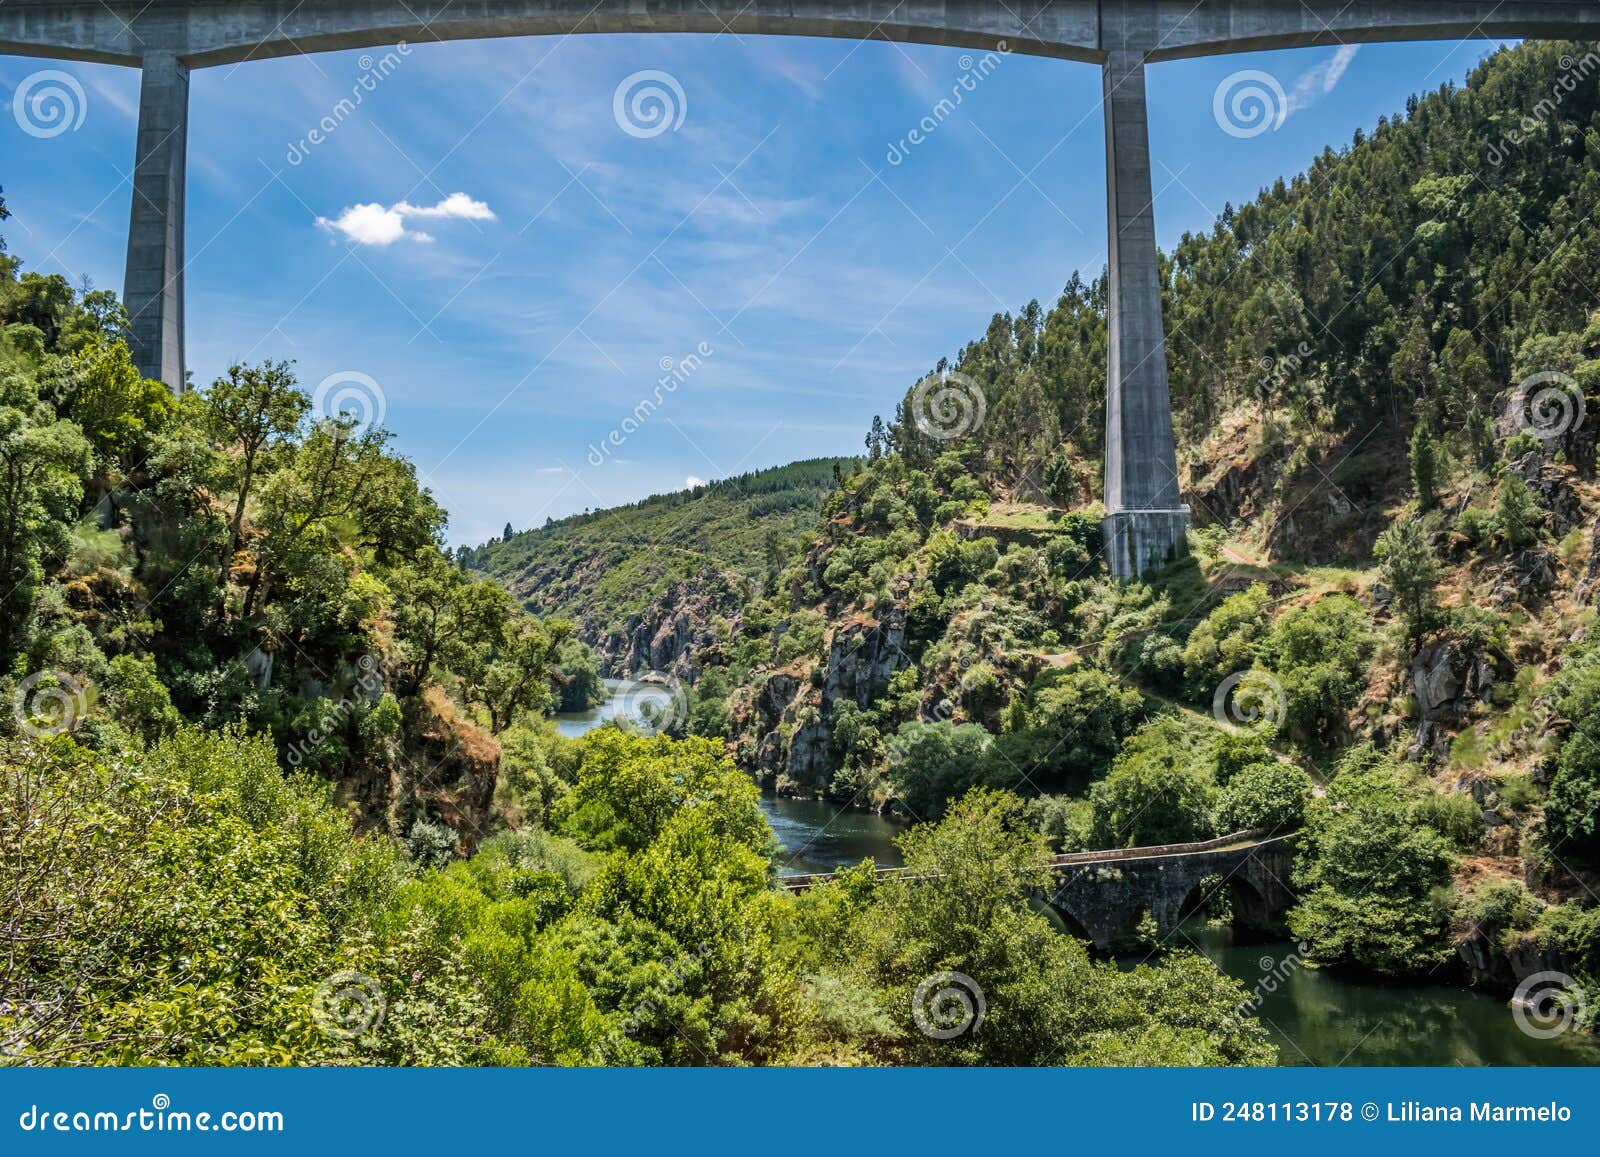 highway bridge framing wild nature with various types of trees on the banks and philippine bridge over the zÃÂªzere river, portugal